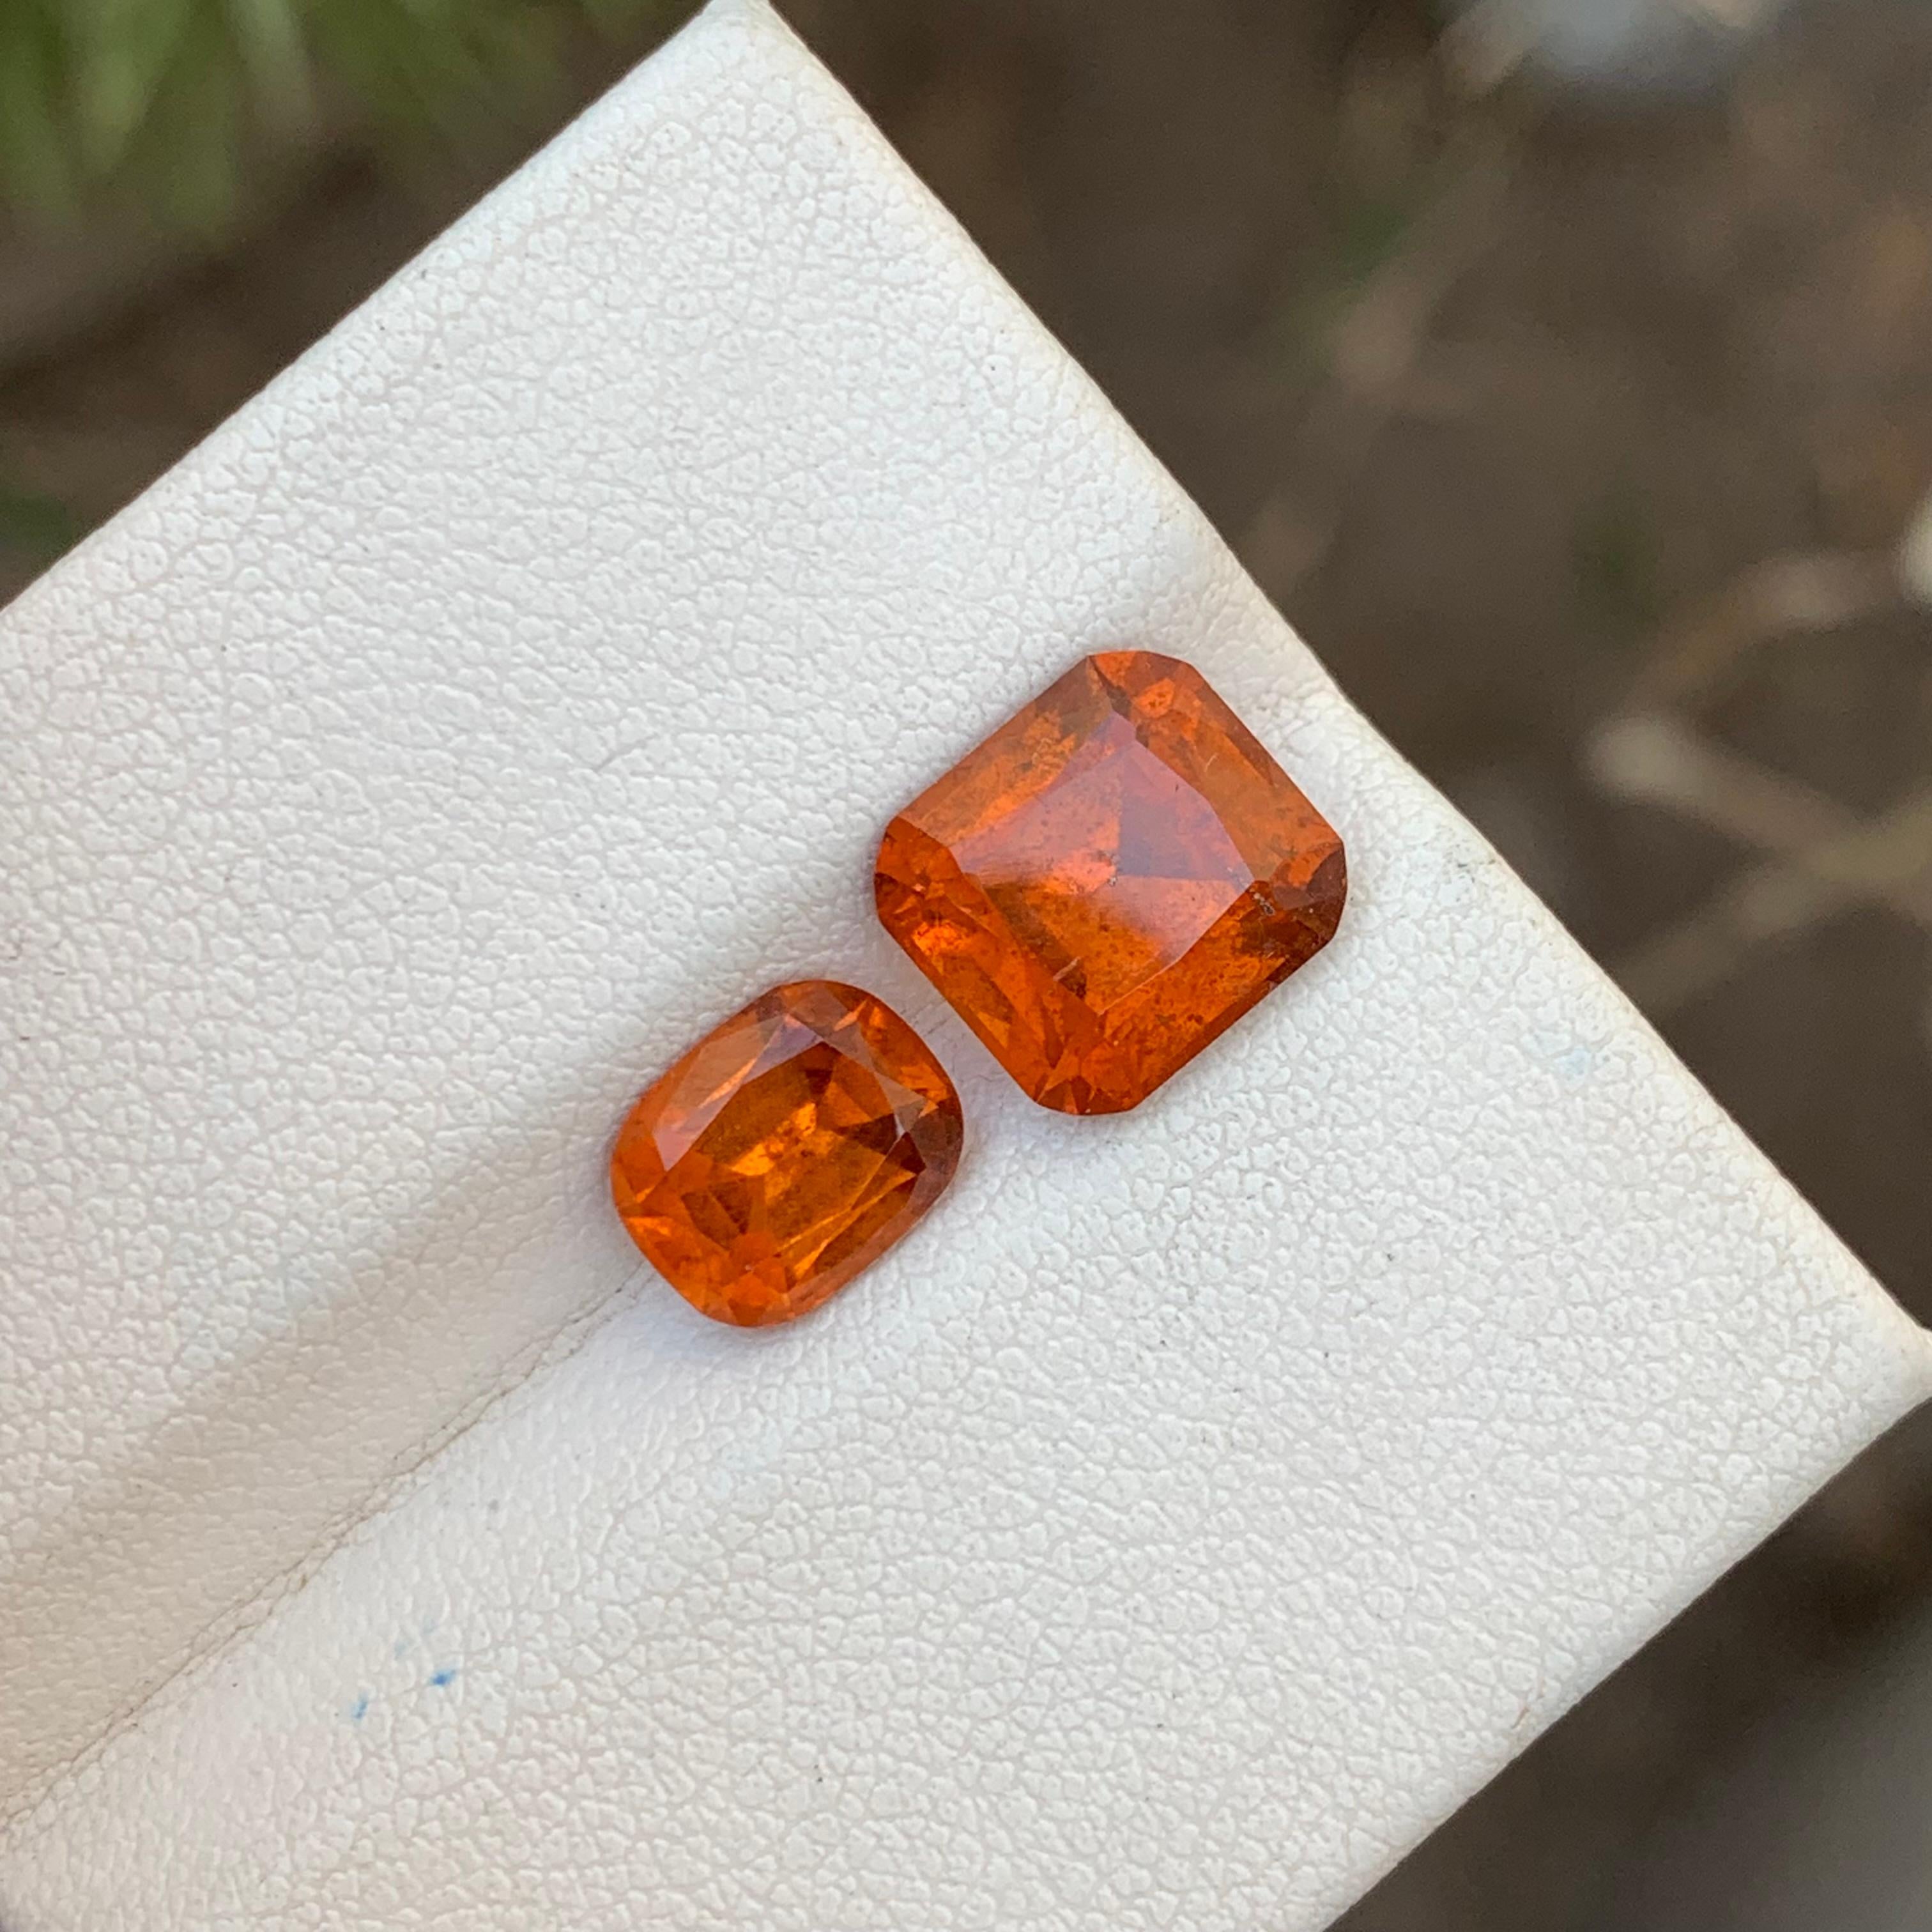 5.95 Carats Natural Loose Hessonite Garnet 2 Pieces For Ring Jewelry Making  en vente 7